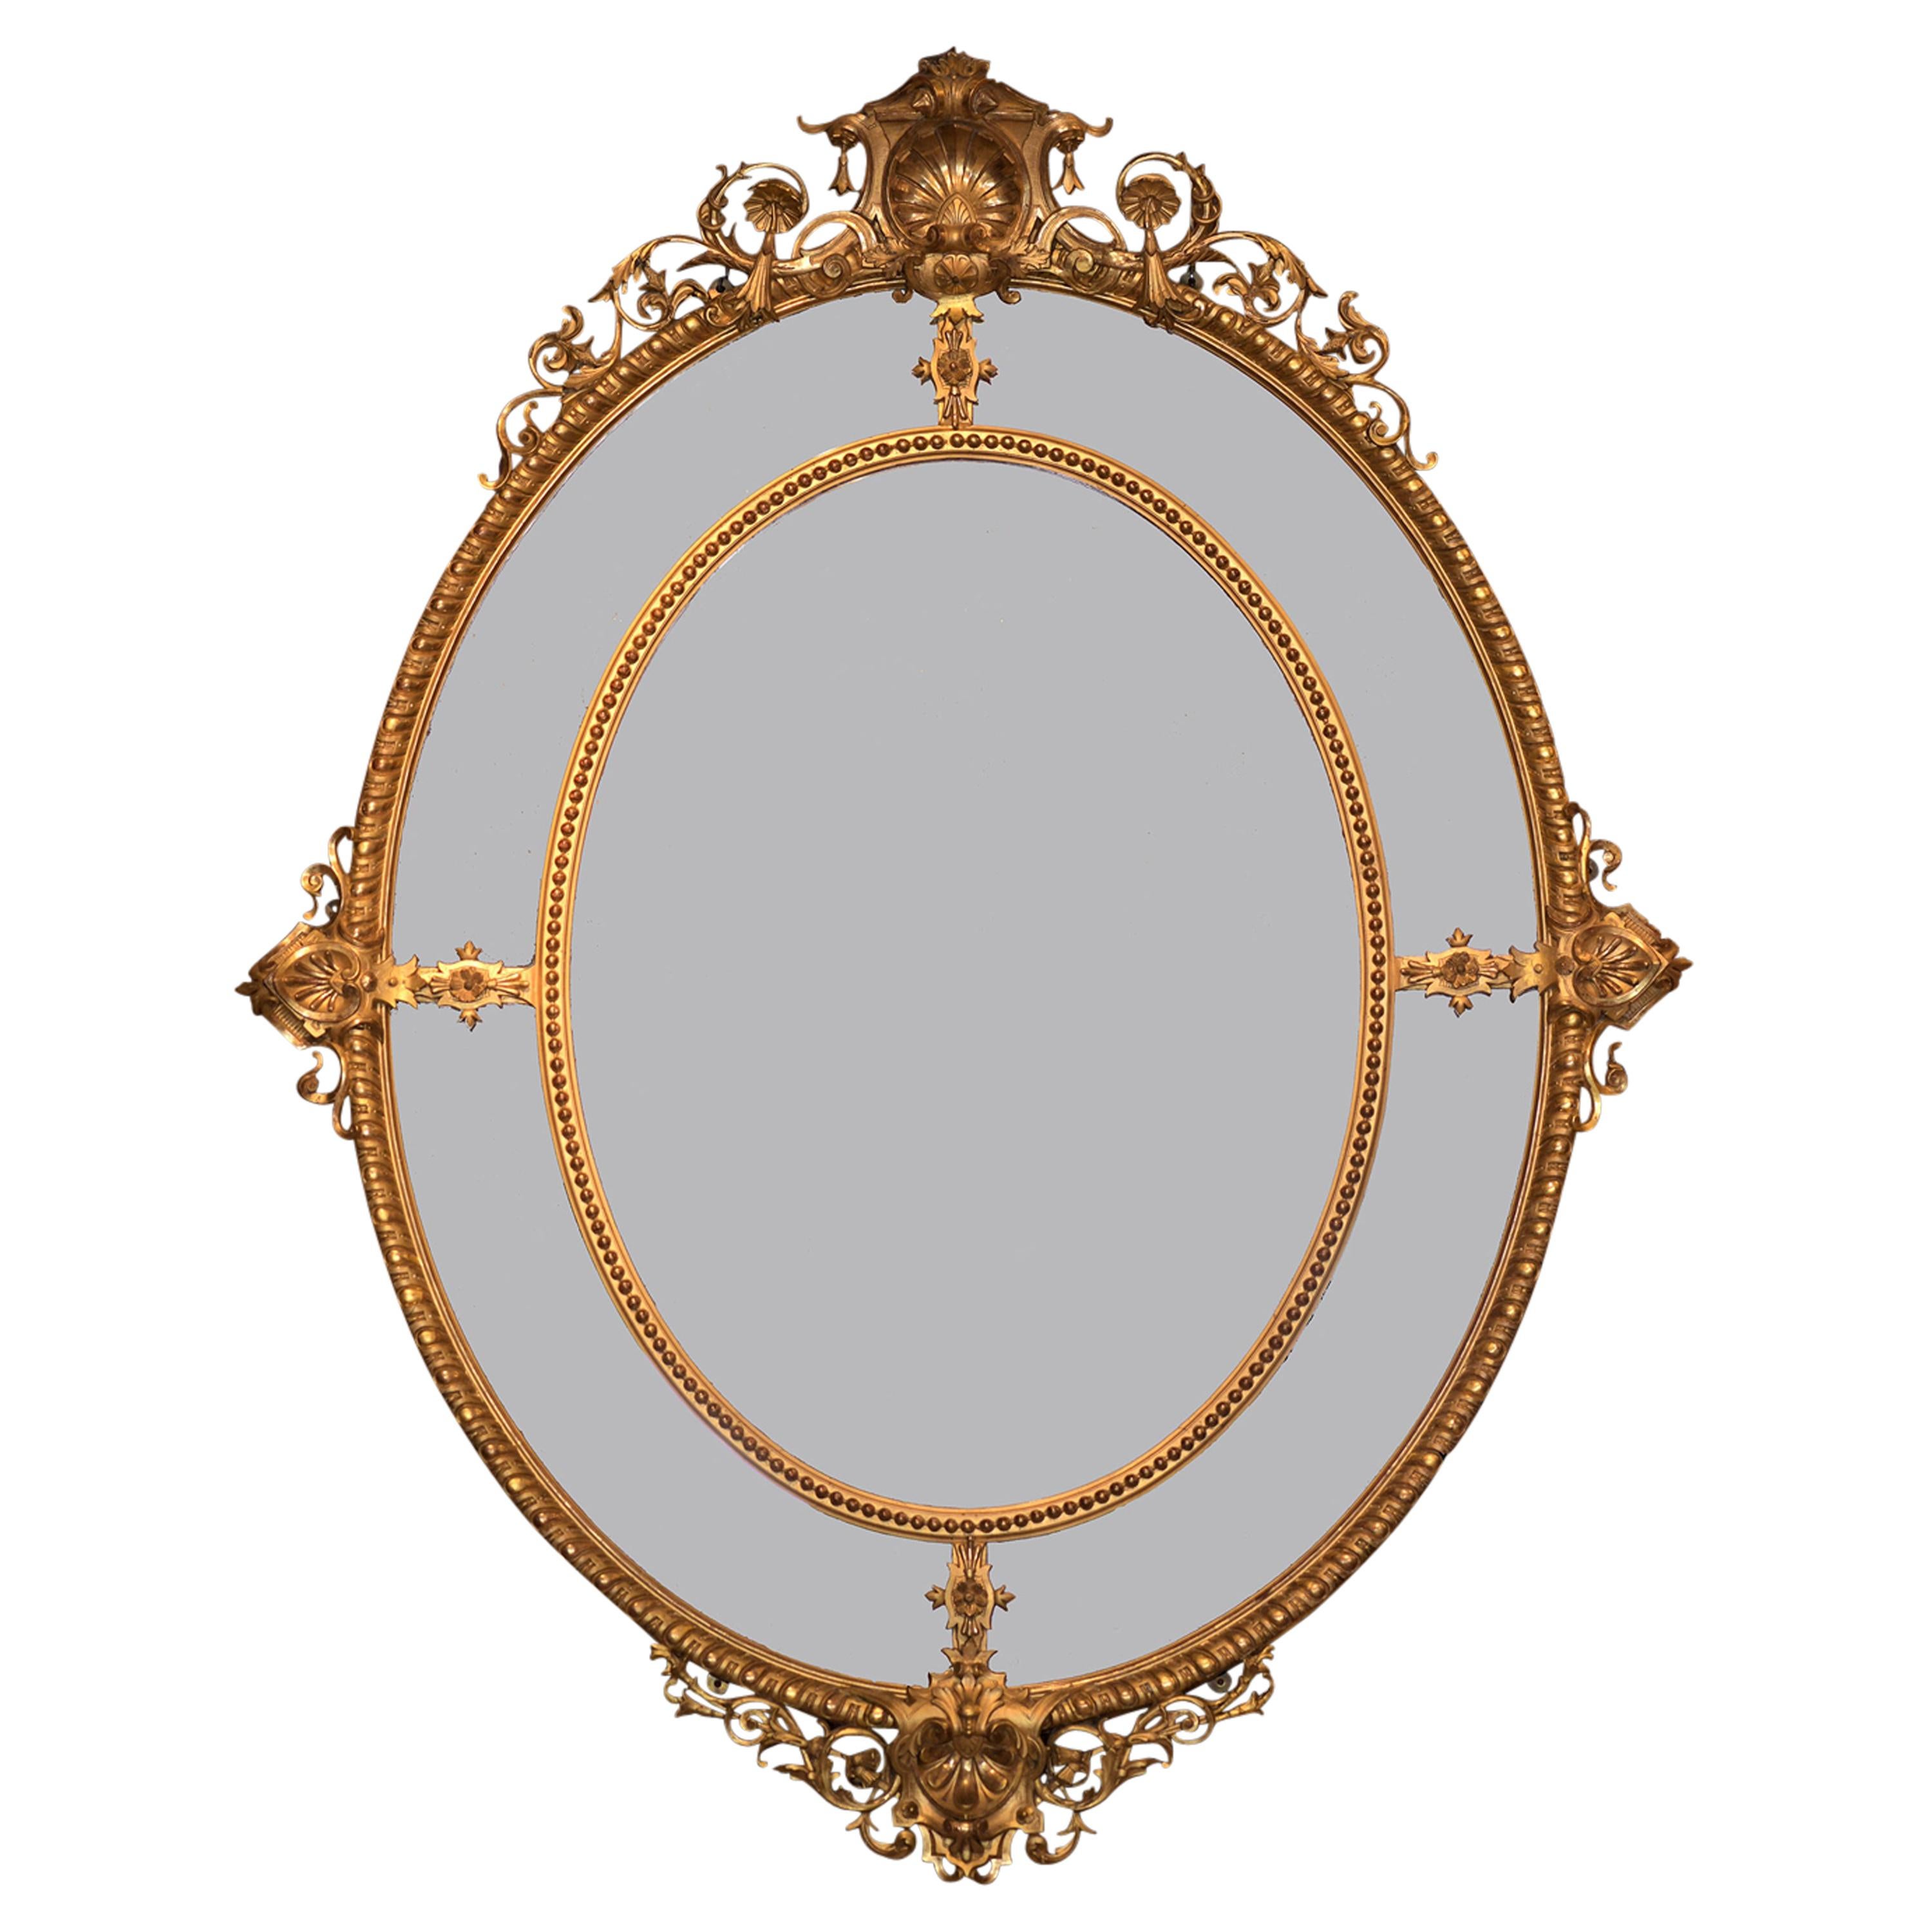 19th Century French Oval Shaped Antique Giltwood Wall Mirror